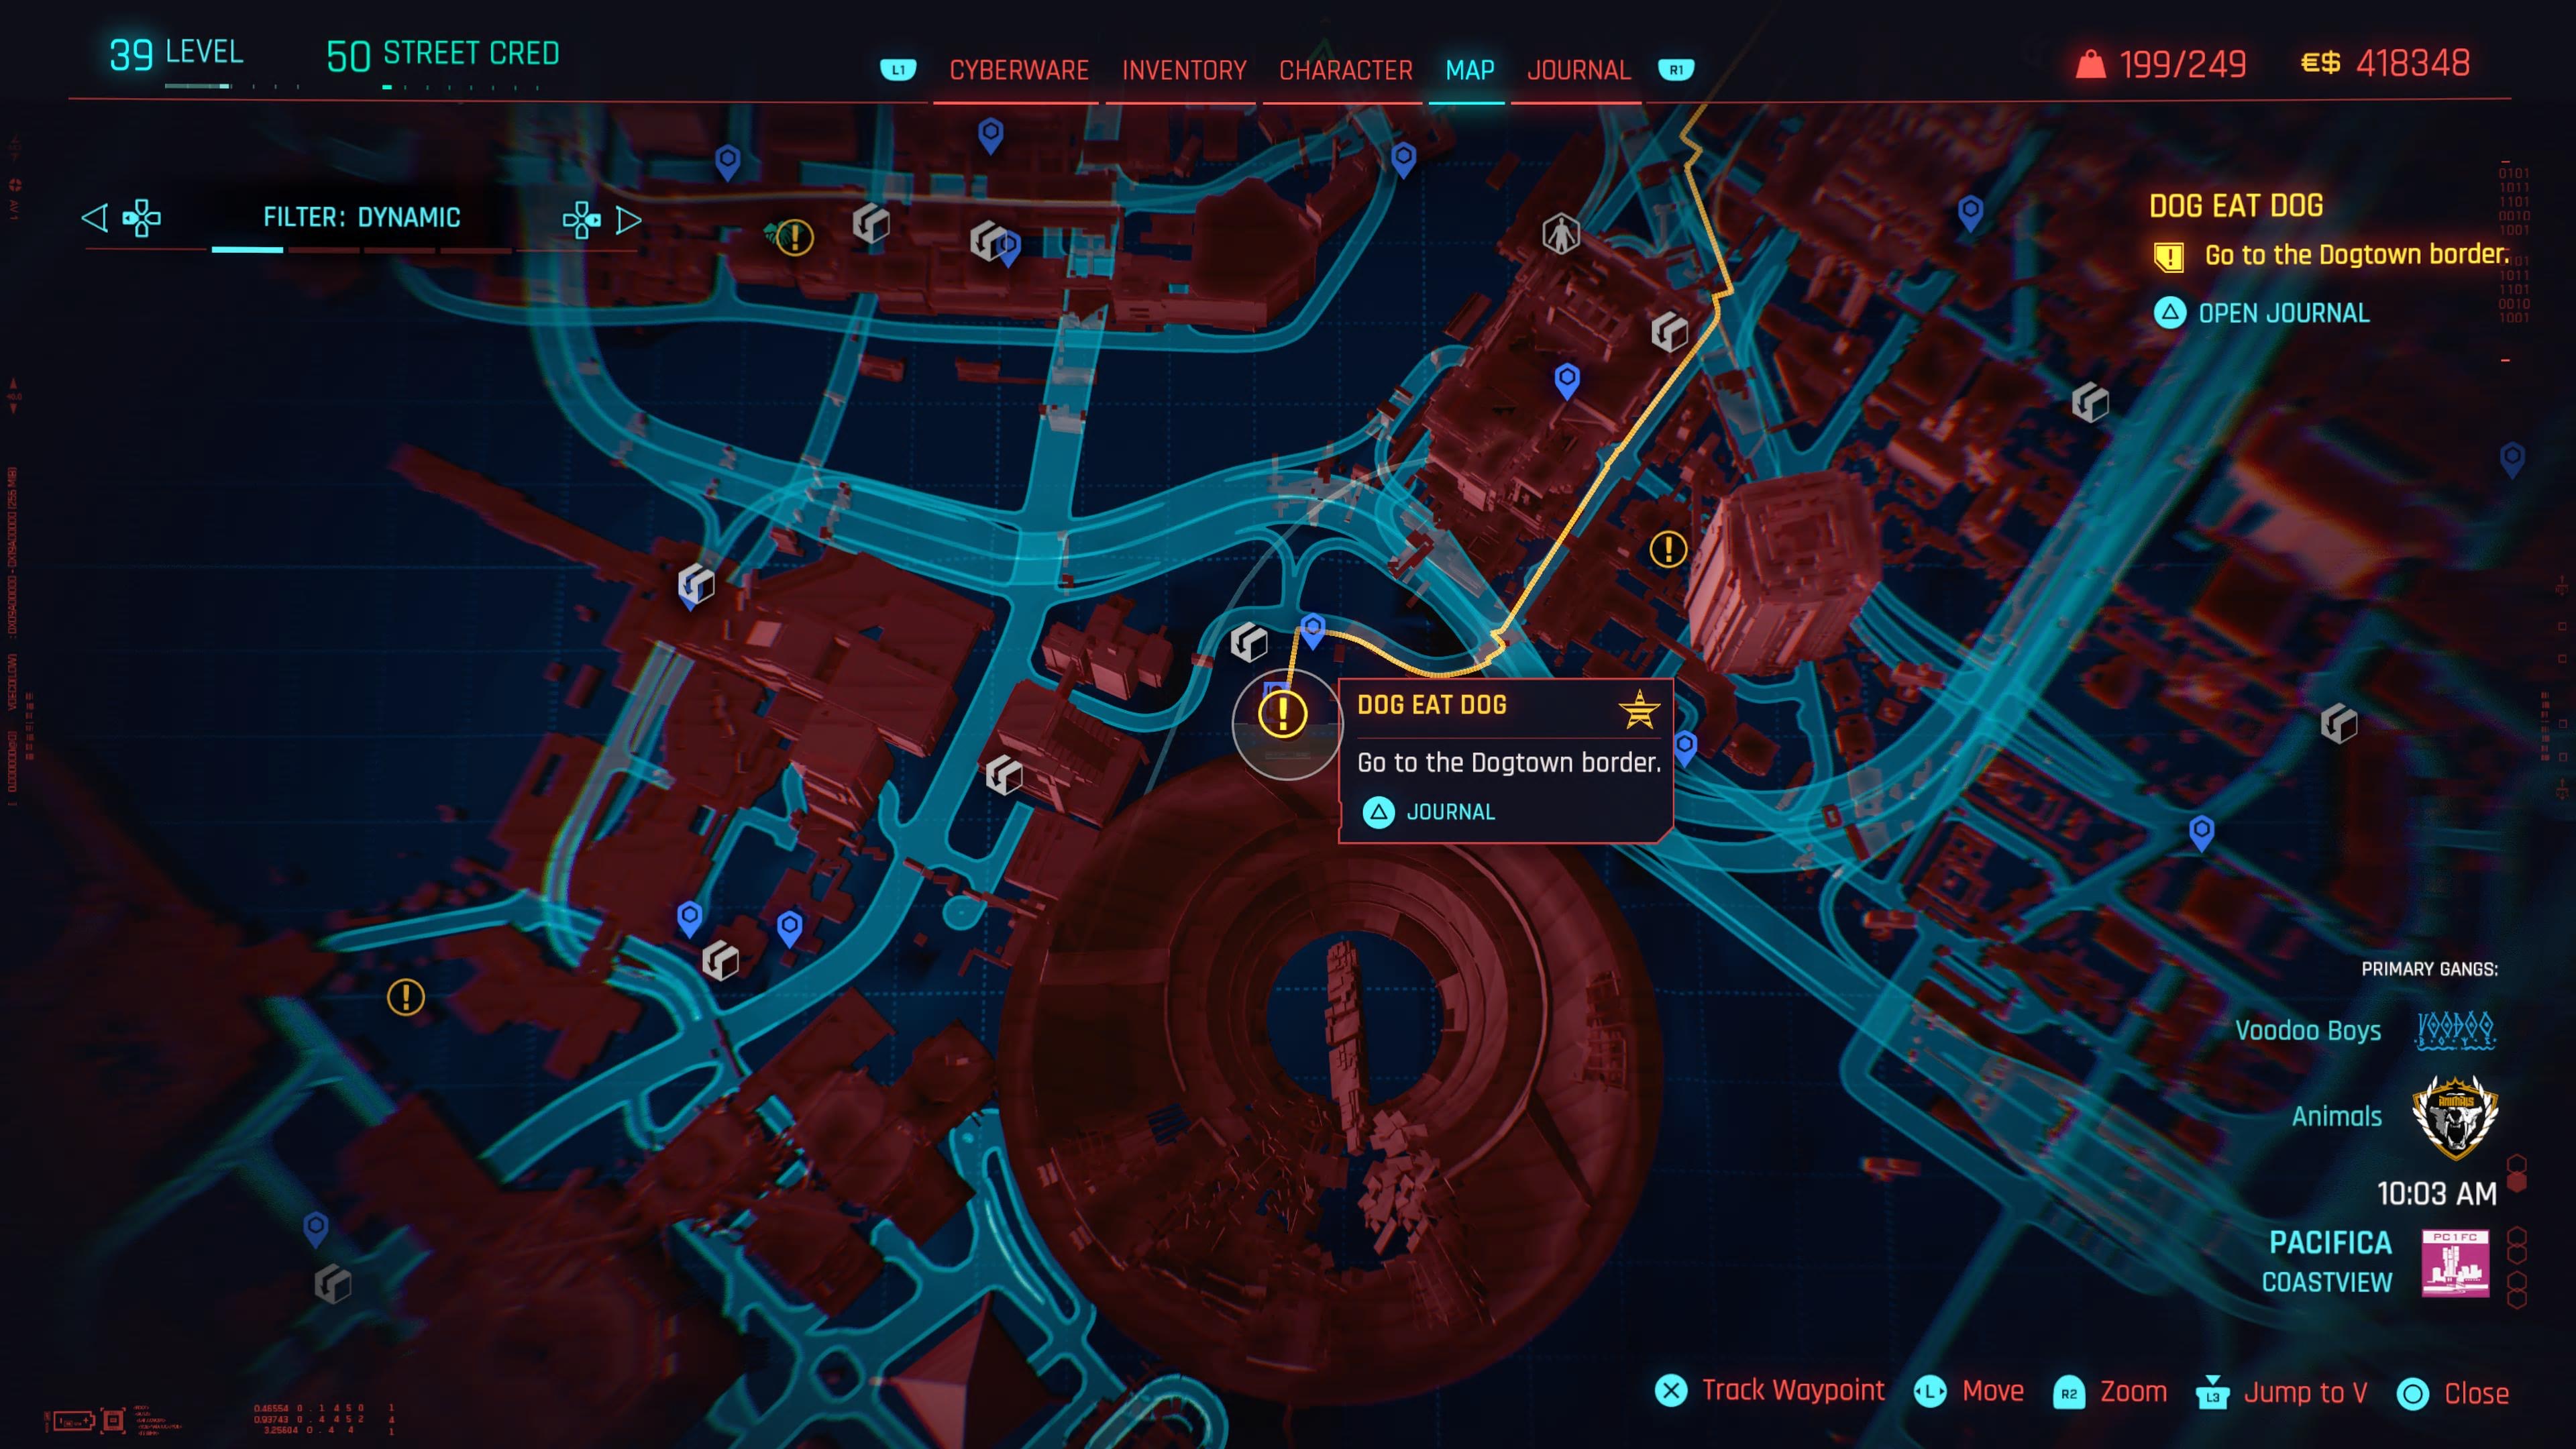 An in game screenshot of the map with the marker following the Dog Eat Dog mission from Cyberpunk 2077 